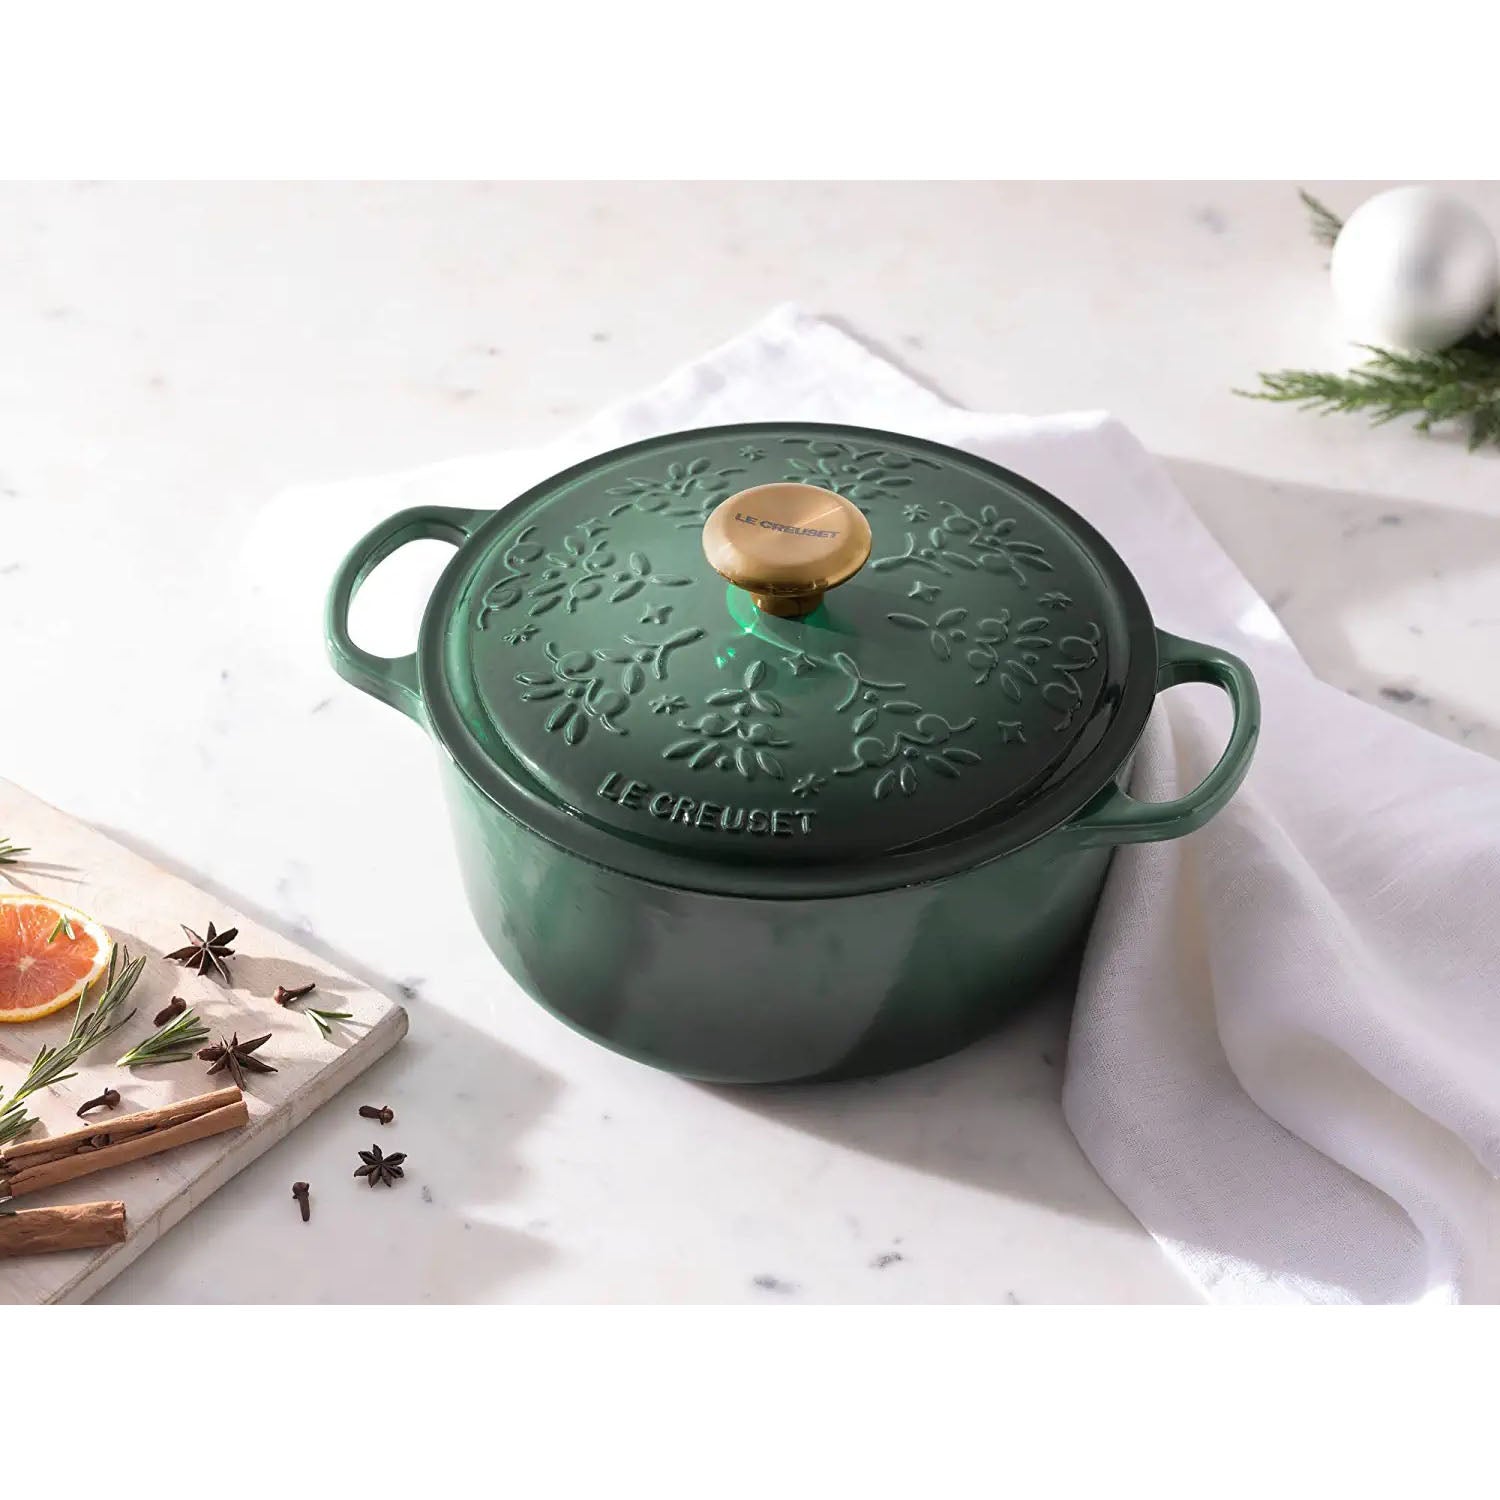 The Le Creuset Dutch Oven Shopping Guide - The Find by Zulily